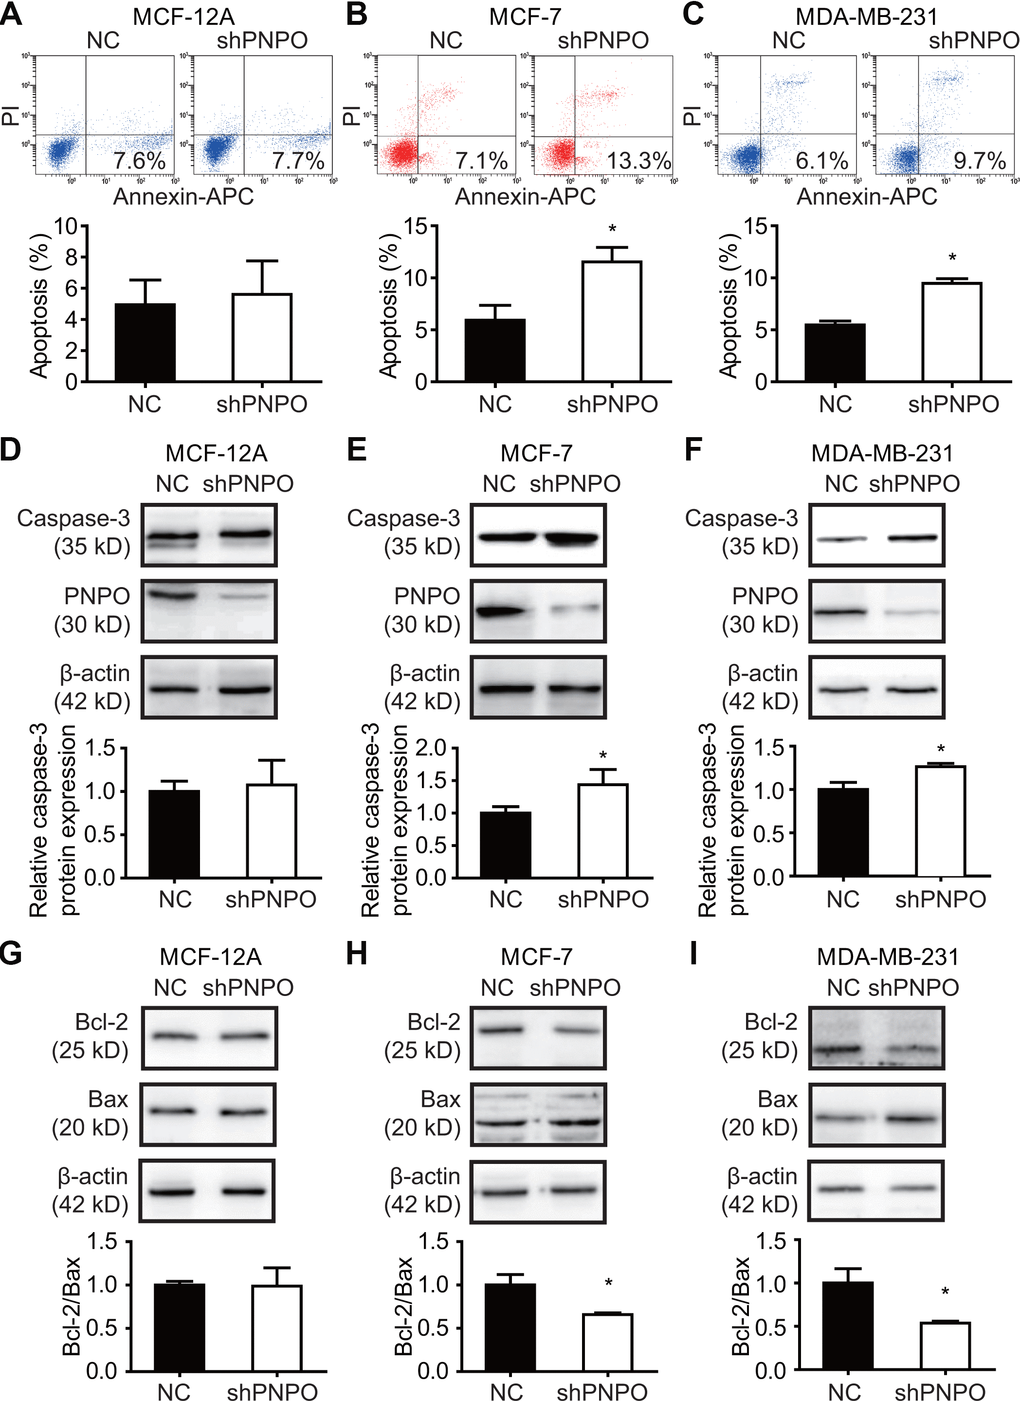 The effect of PNPO on breast cell apoptosis. (A–C) Apoptotic cells were detected by flow cytometry after PNPO knockdown in MCF-12A (A), MCF-7 (B), and MDA-MB-231 (C) cells. (D–F) Expression of caspase-3 and PNPO protein after PNPO knockdown in MCF-12A (D), MCF-7 (E), and MDA-MB-231 (F) cells detection by Western blot. (G–I) Expression of Bcl-2 and Bax protein after PNPO knockdown in MCF-12A (G), MCF-7 (H), and MDA-MB-231 (I) cells detection by Western blot. Histograms show the quantitative analyses. NC, negative control of shRNA; shPNPO, PNPO-shRNA. n =3; * P 